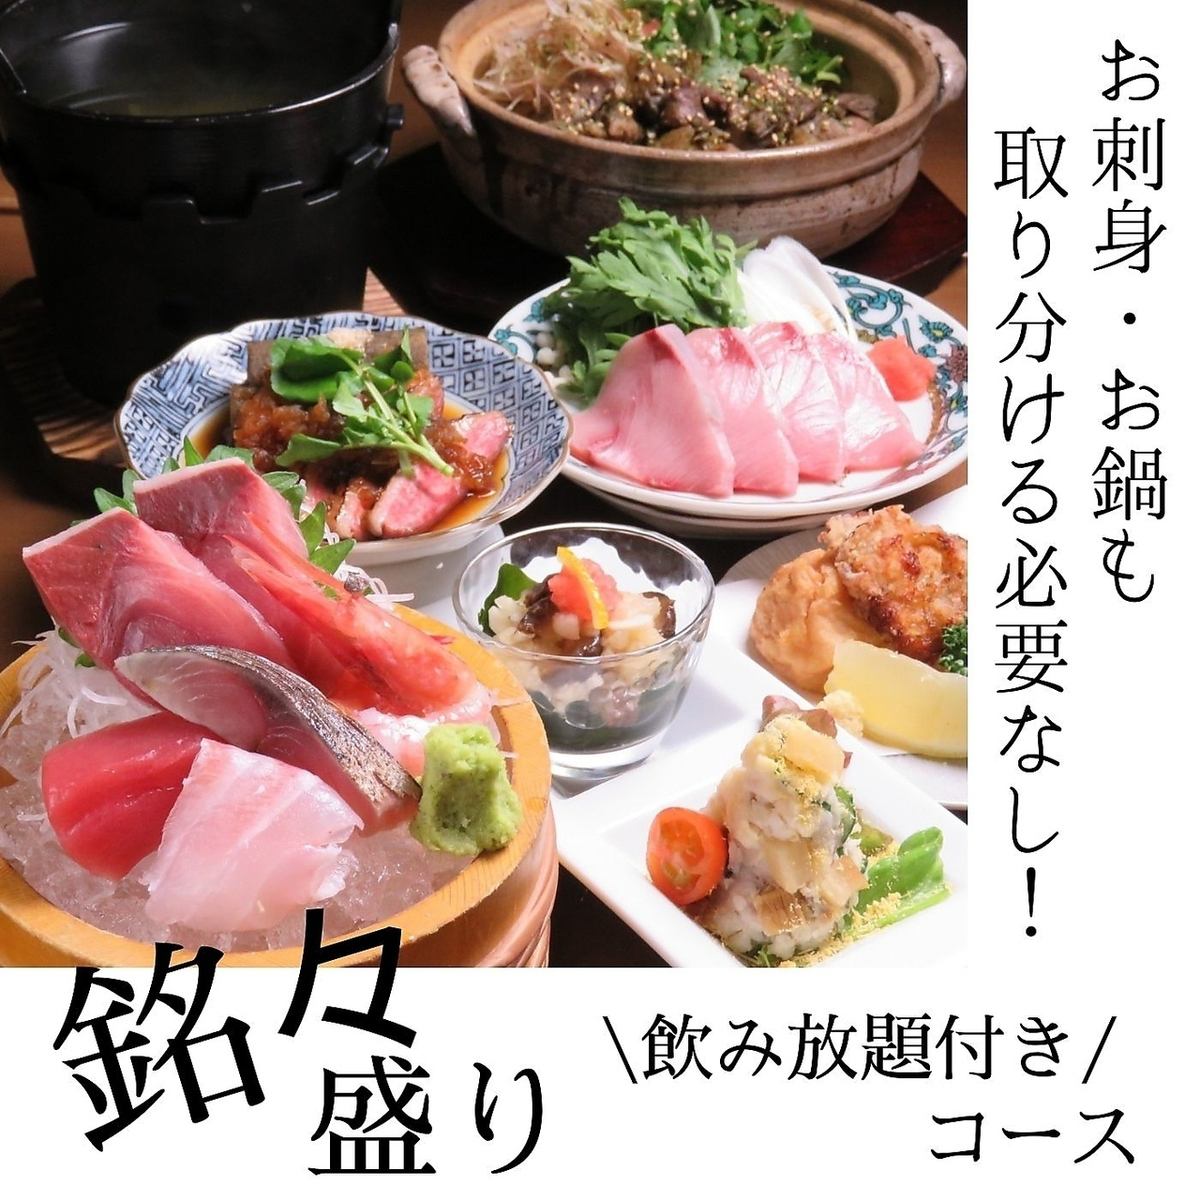 With all-you-can-drink courses starting from 6,000 yen, you can enjoy the delicacies of Hokuriku.